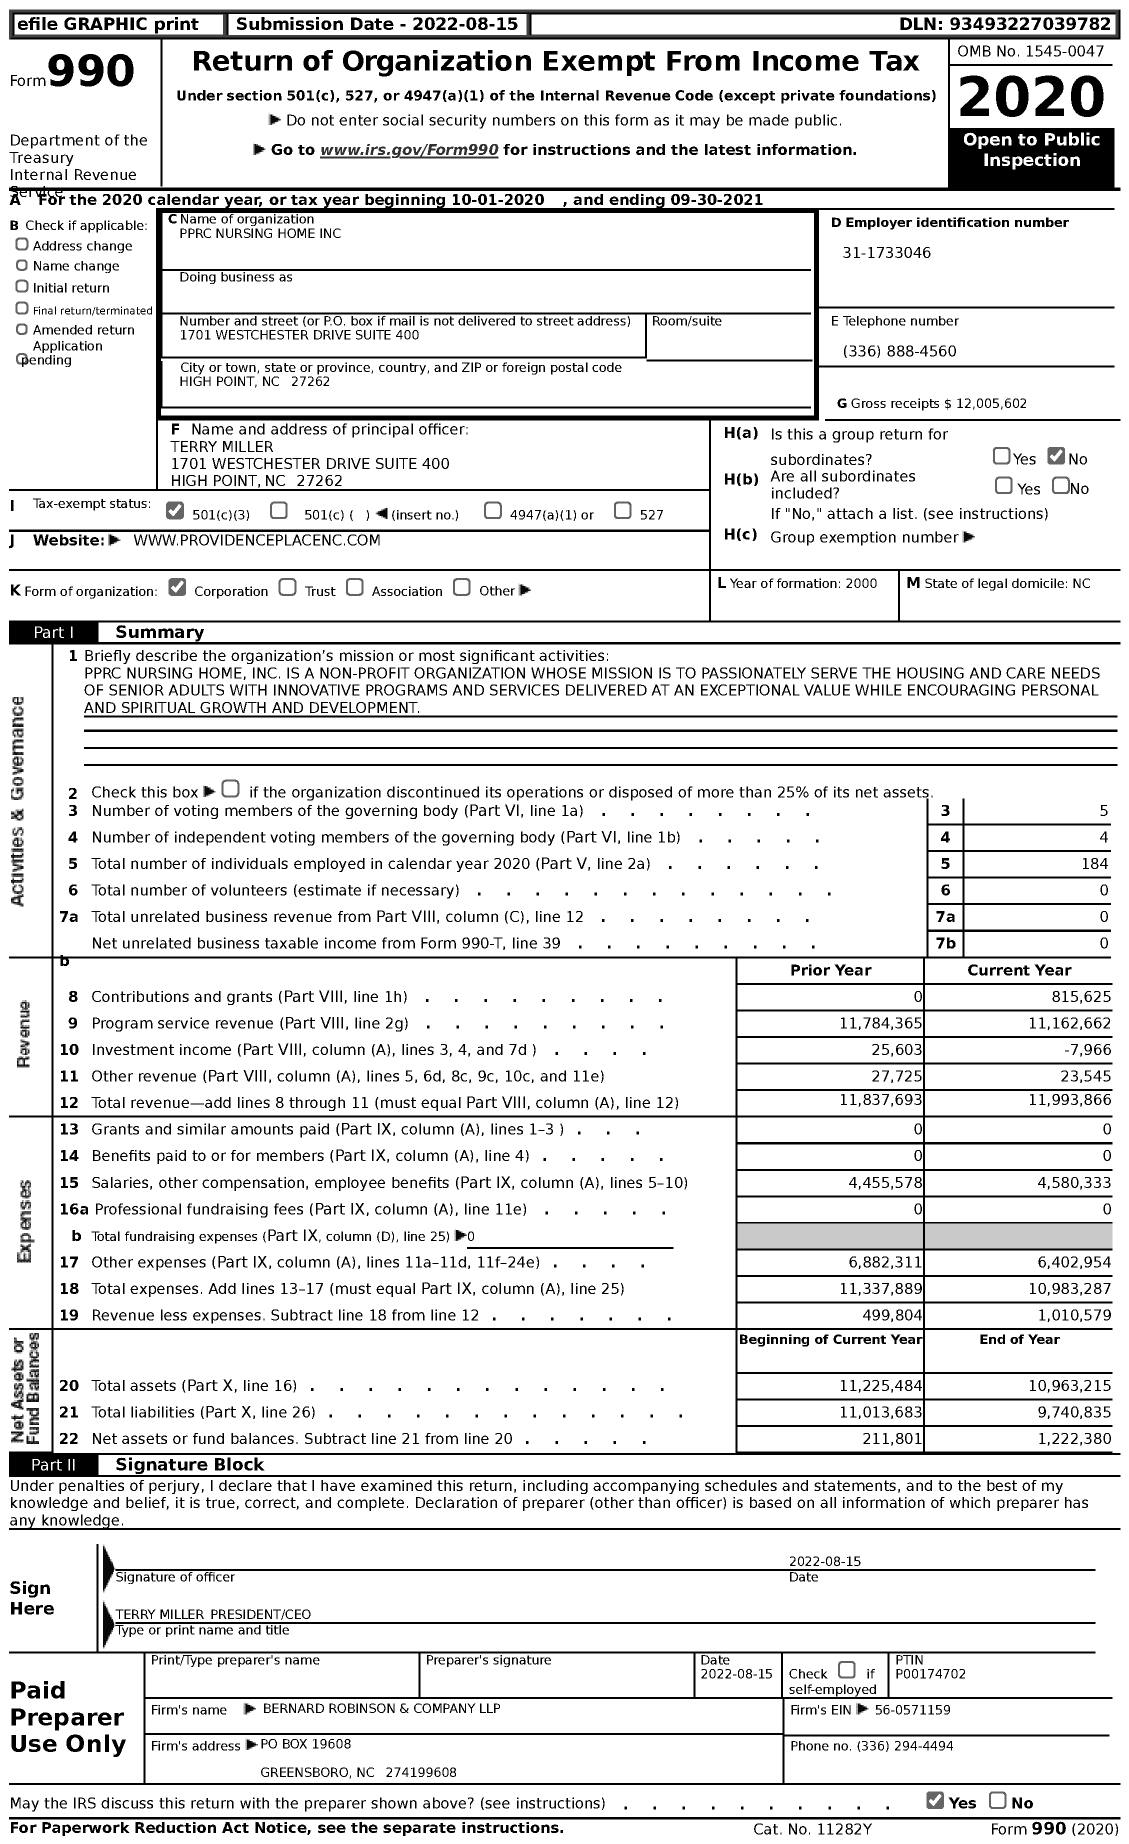 Image of first page of 2020 Form 990 for PPRC Nursing Home